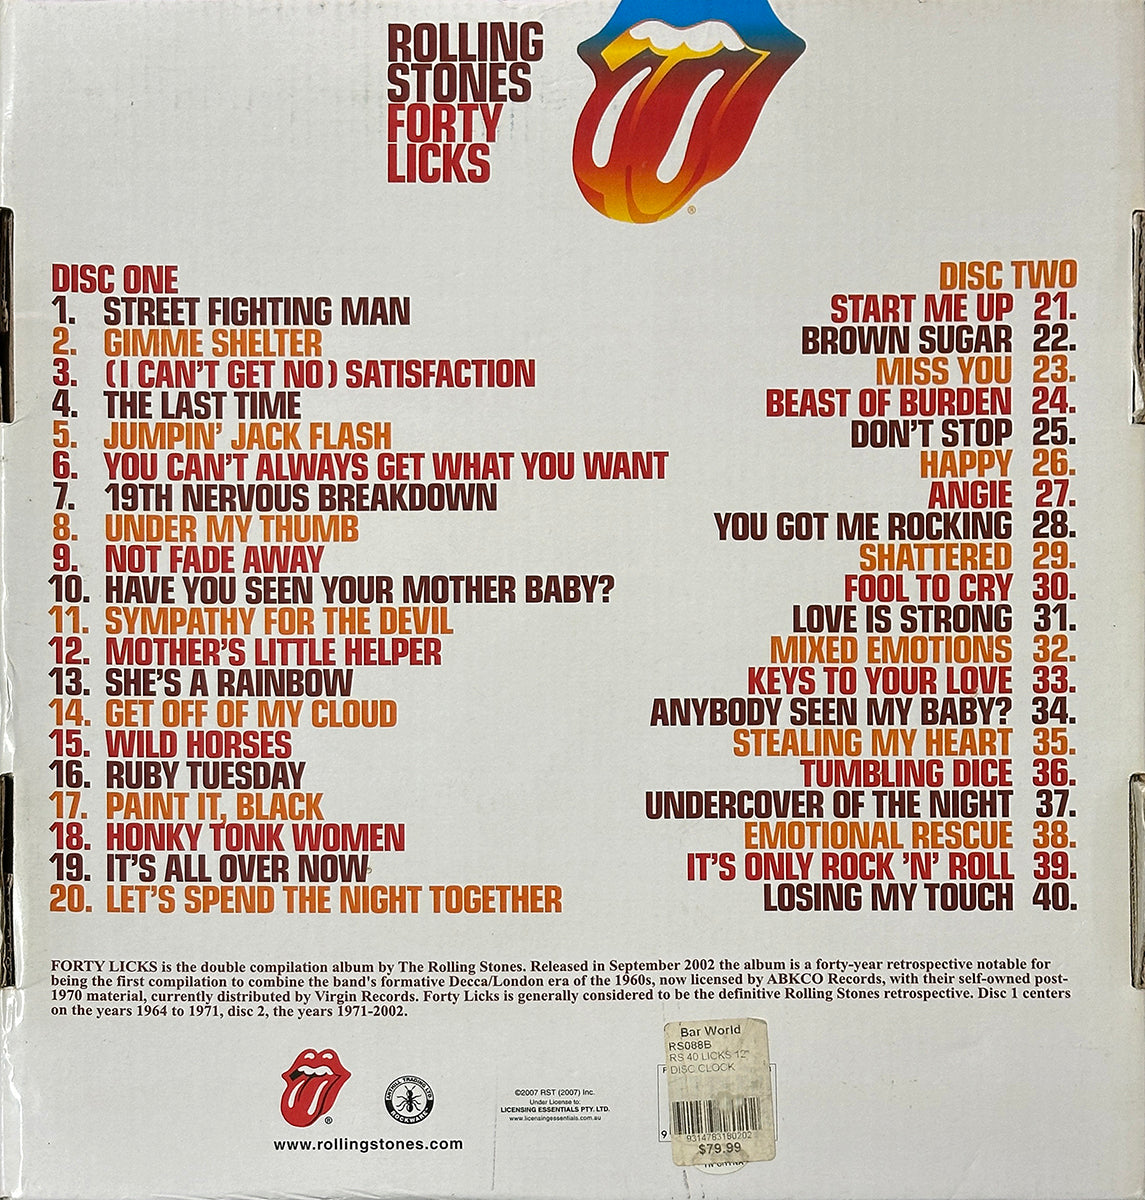 Rolling Stones Forty Licks Clock